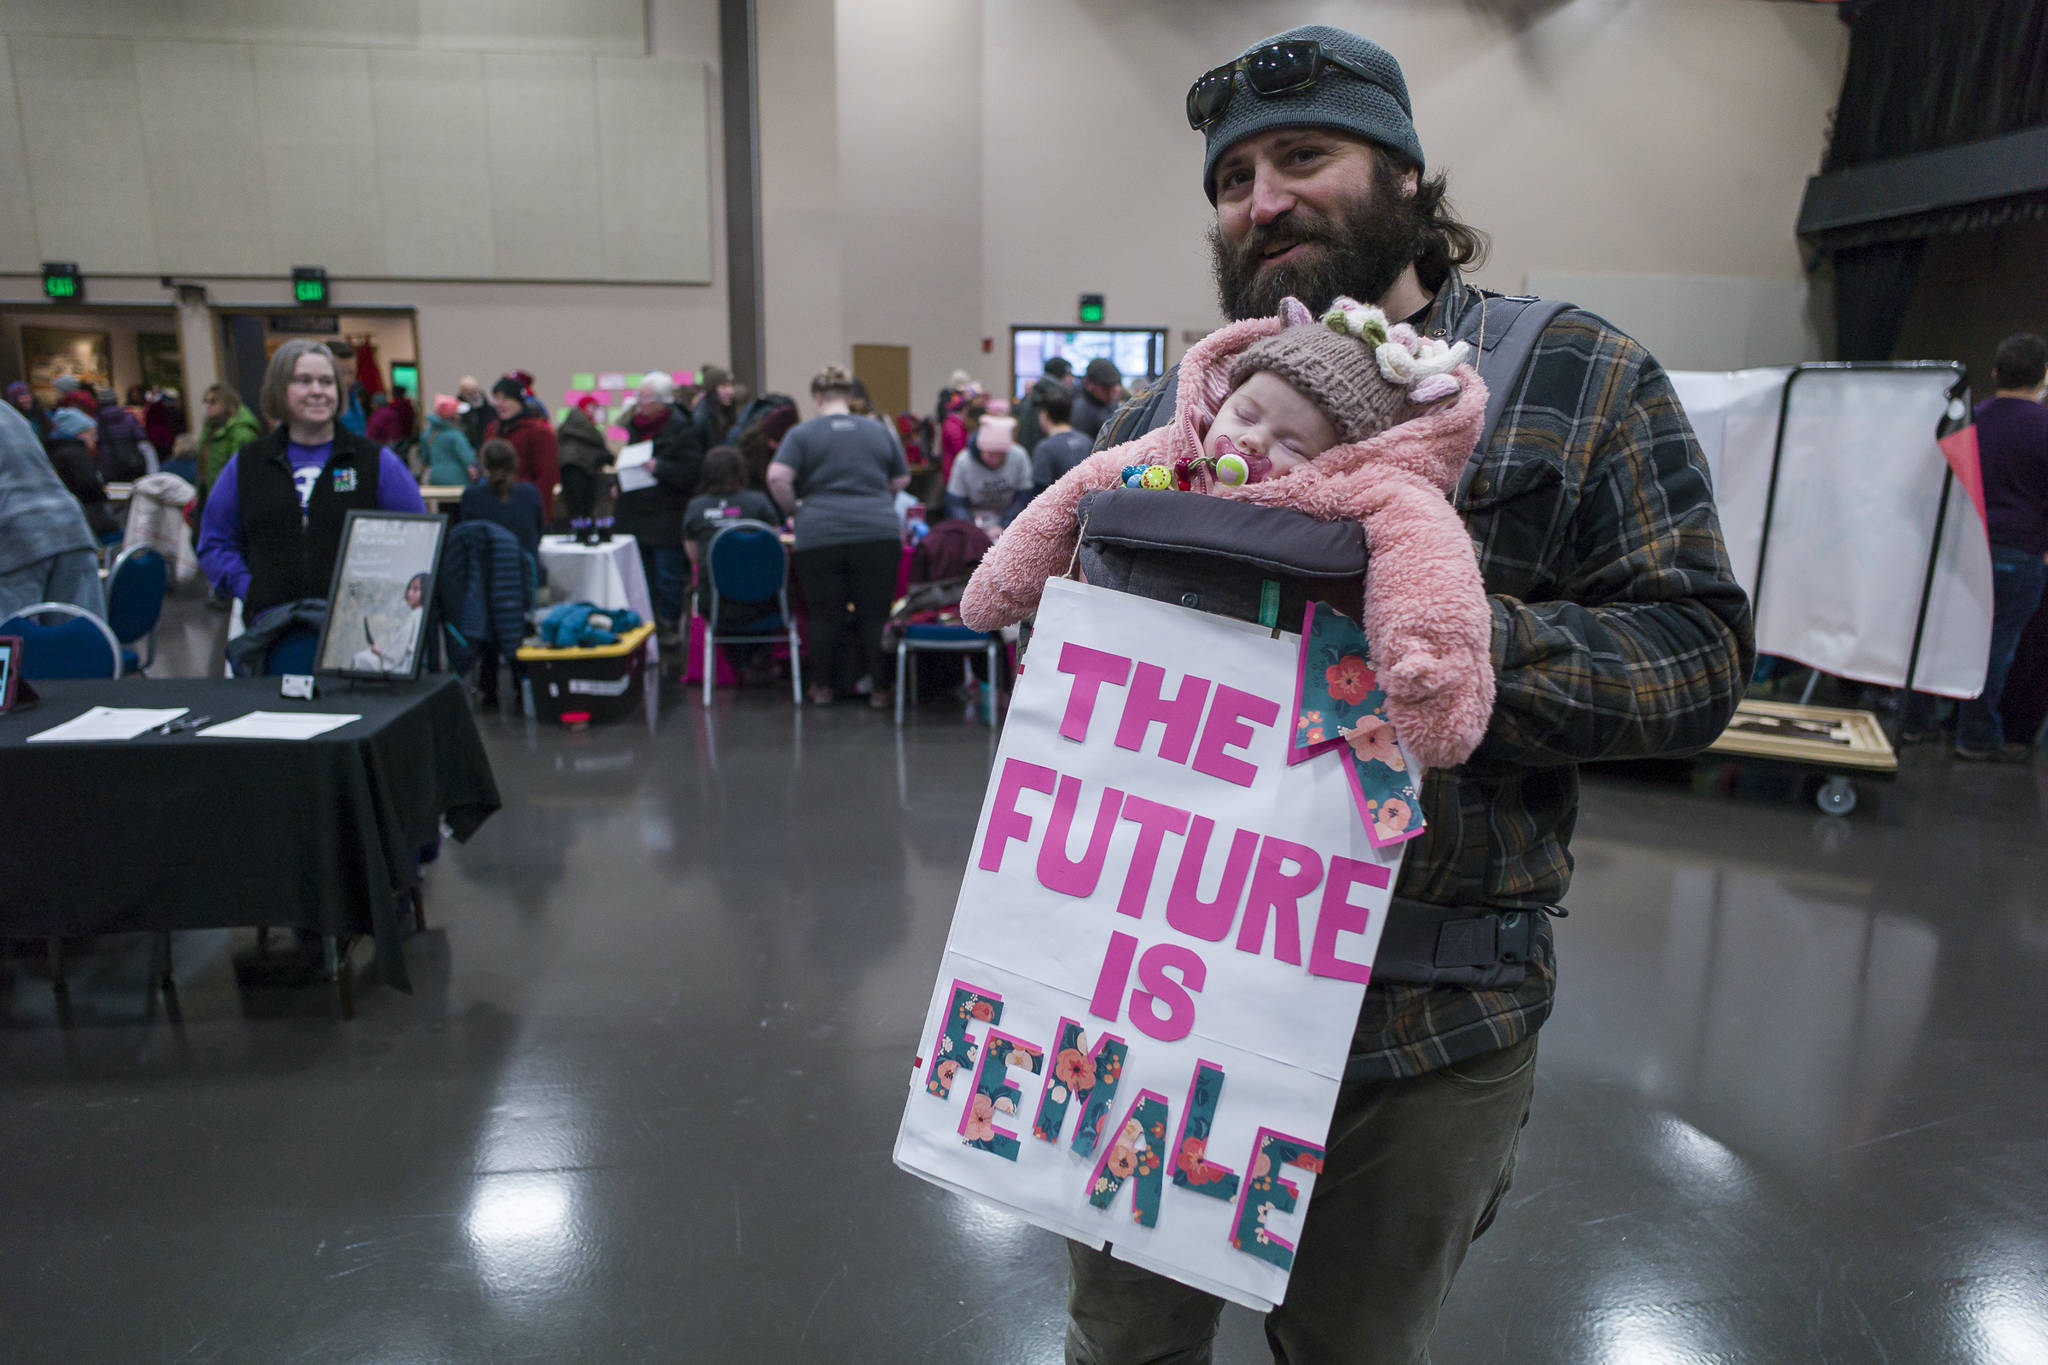 Frank Lambert stops by Centennial Hall with his three-month-old daughter, Frankie, after the Women’s March on Juneau on Saturday, Jan. 19, 2019. (Michael Penn | Juneau Empire)